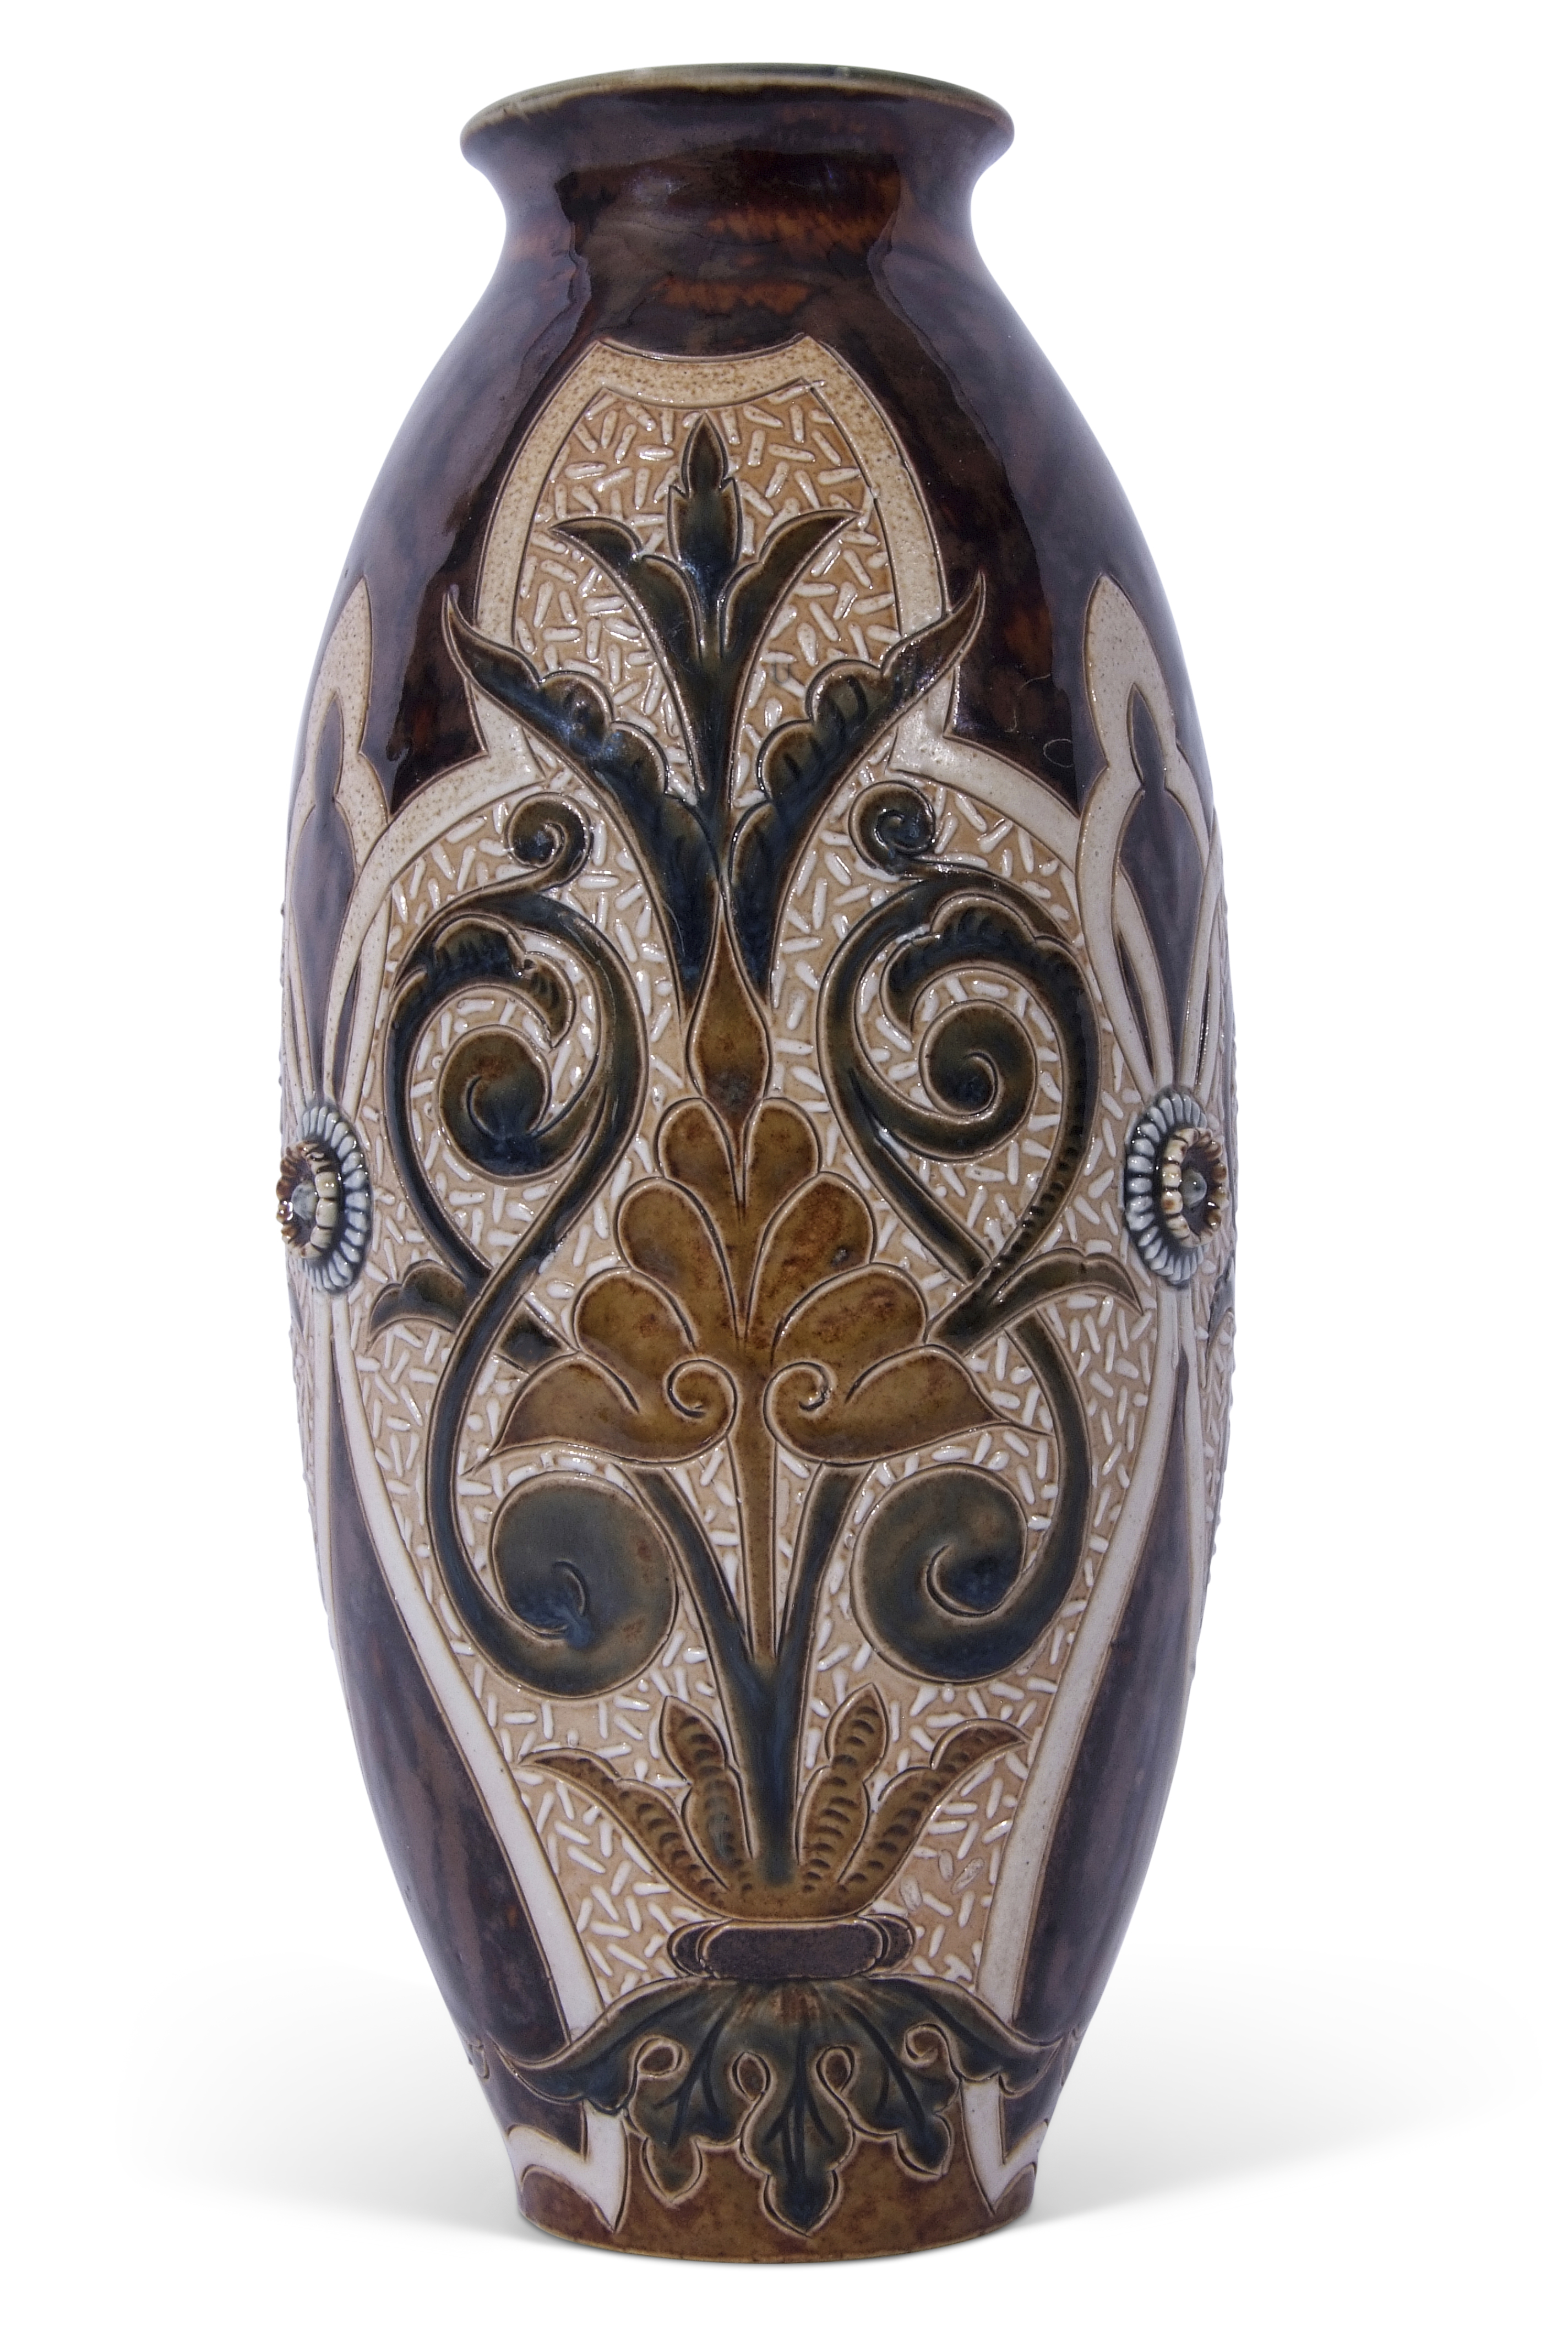 Late 19th century Doulton Lambeth stoneware vase of ovoid shape with an incised geometric design